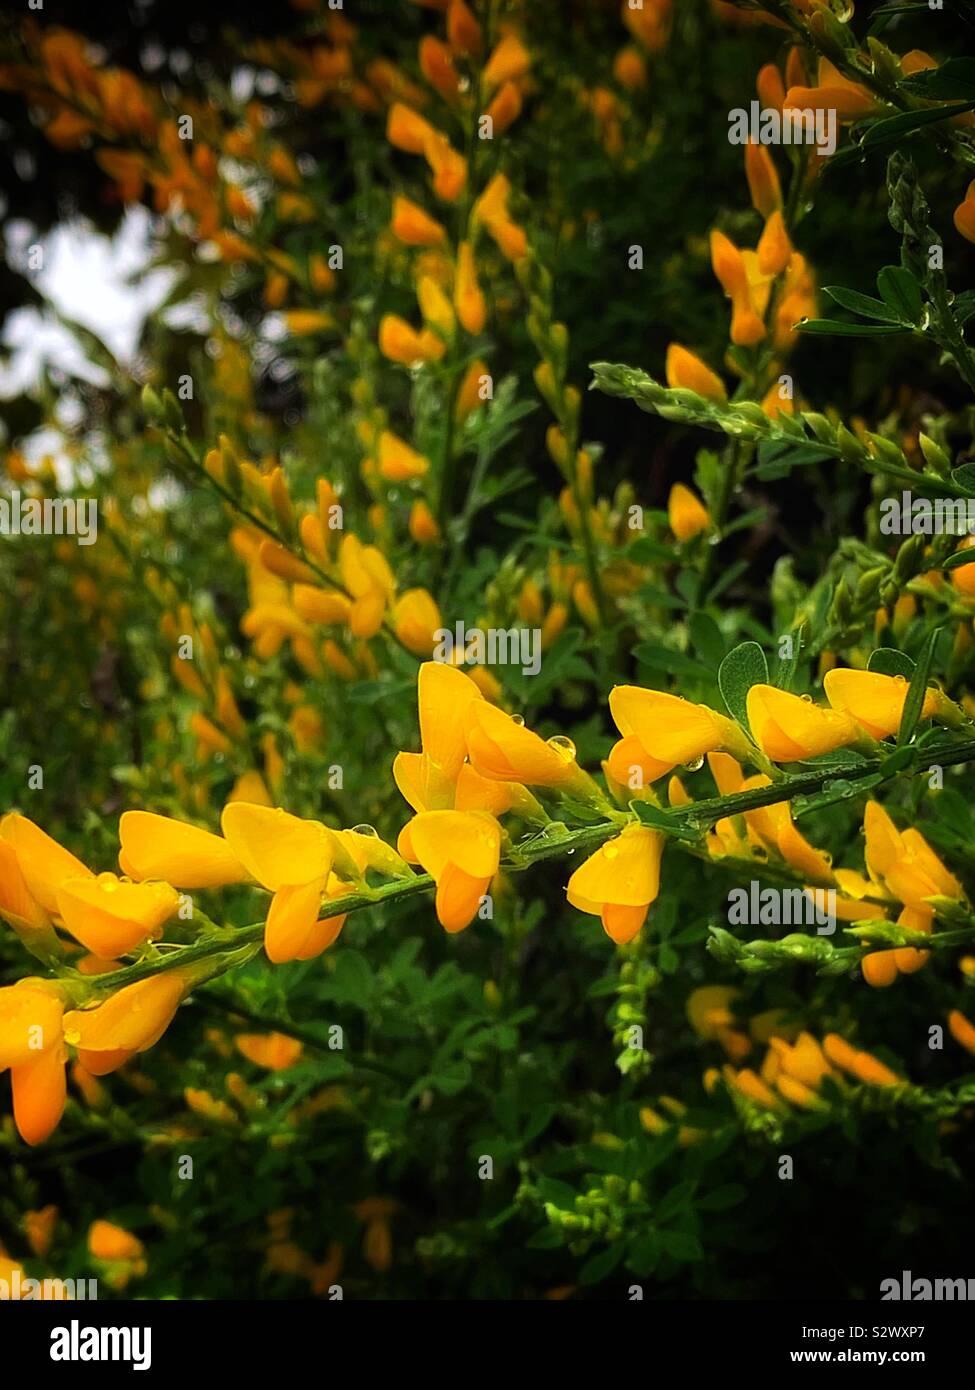 Scotch Broom After The Rain In English Cytisus Scoparius In Spanish 金雀兒 別名錦雞兒 In Chinese Stock Photo Alamy